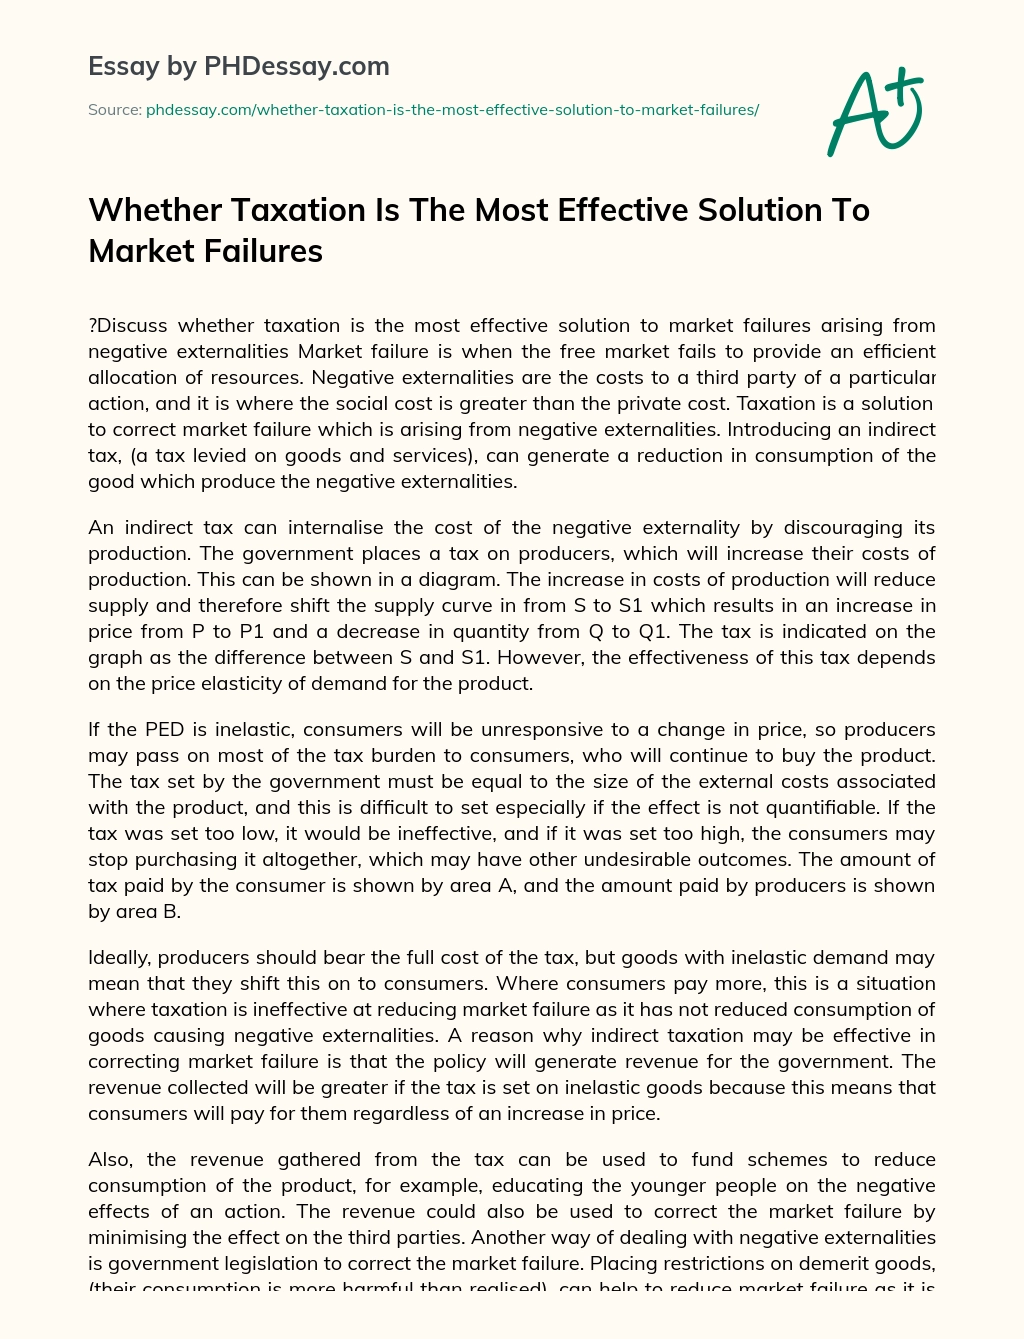 Whether Taxation Is The Most Effective Solution To Market Failures essay